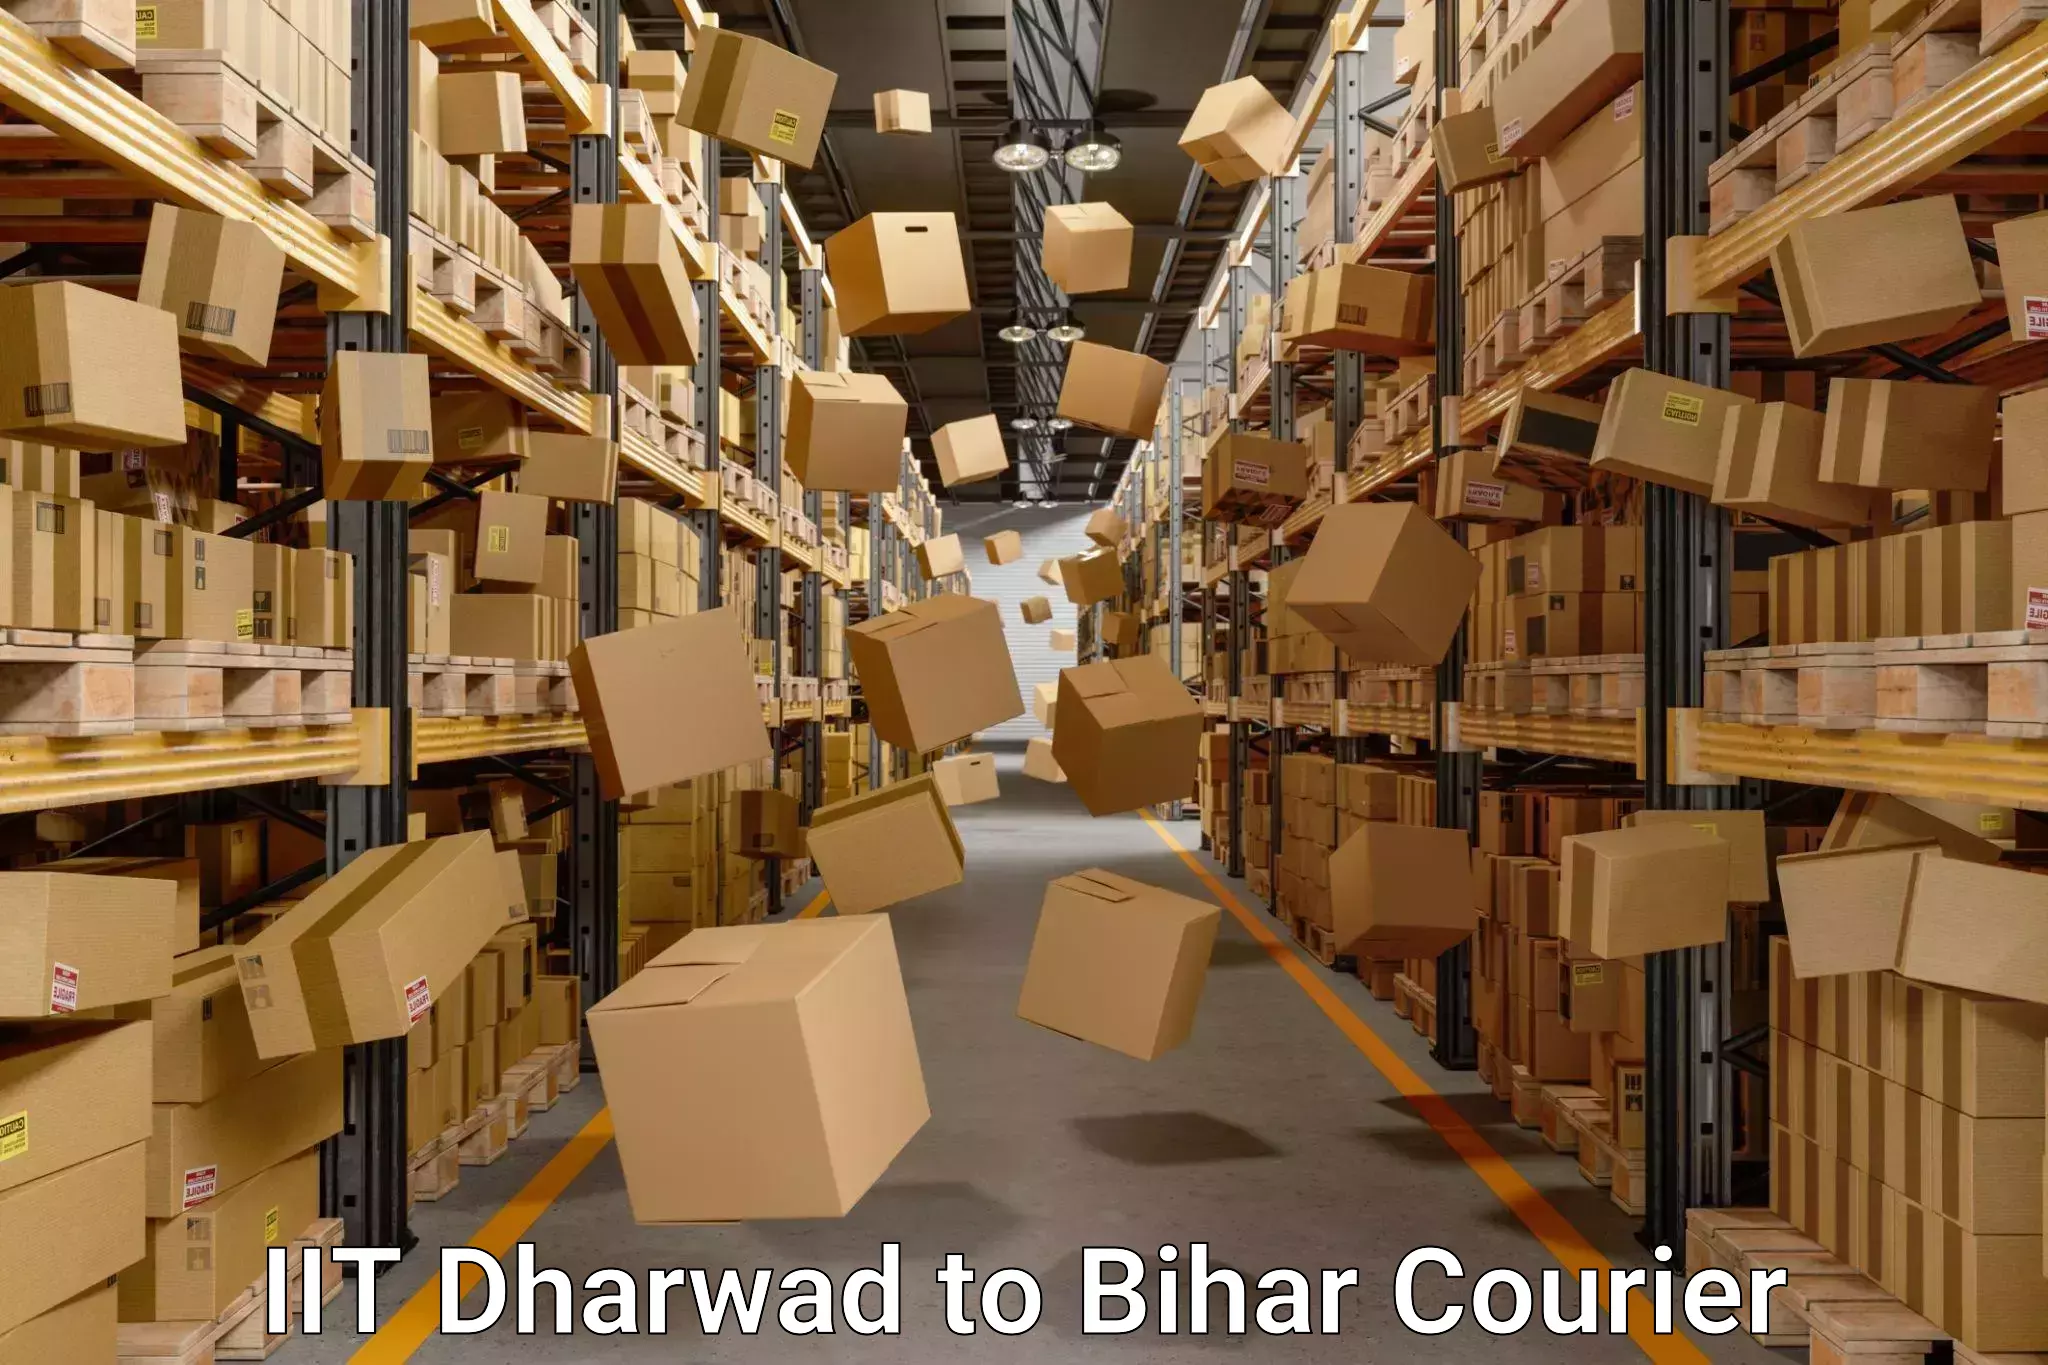 Home moving experts IIT Dharwad to Biraul